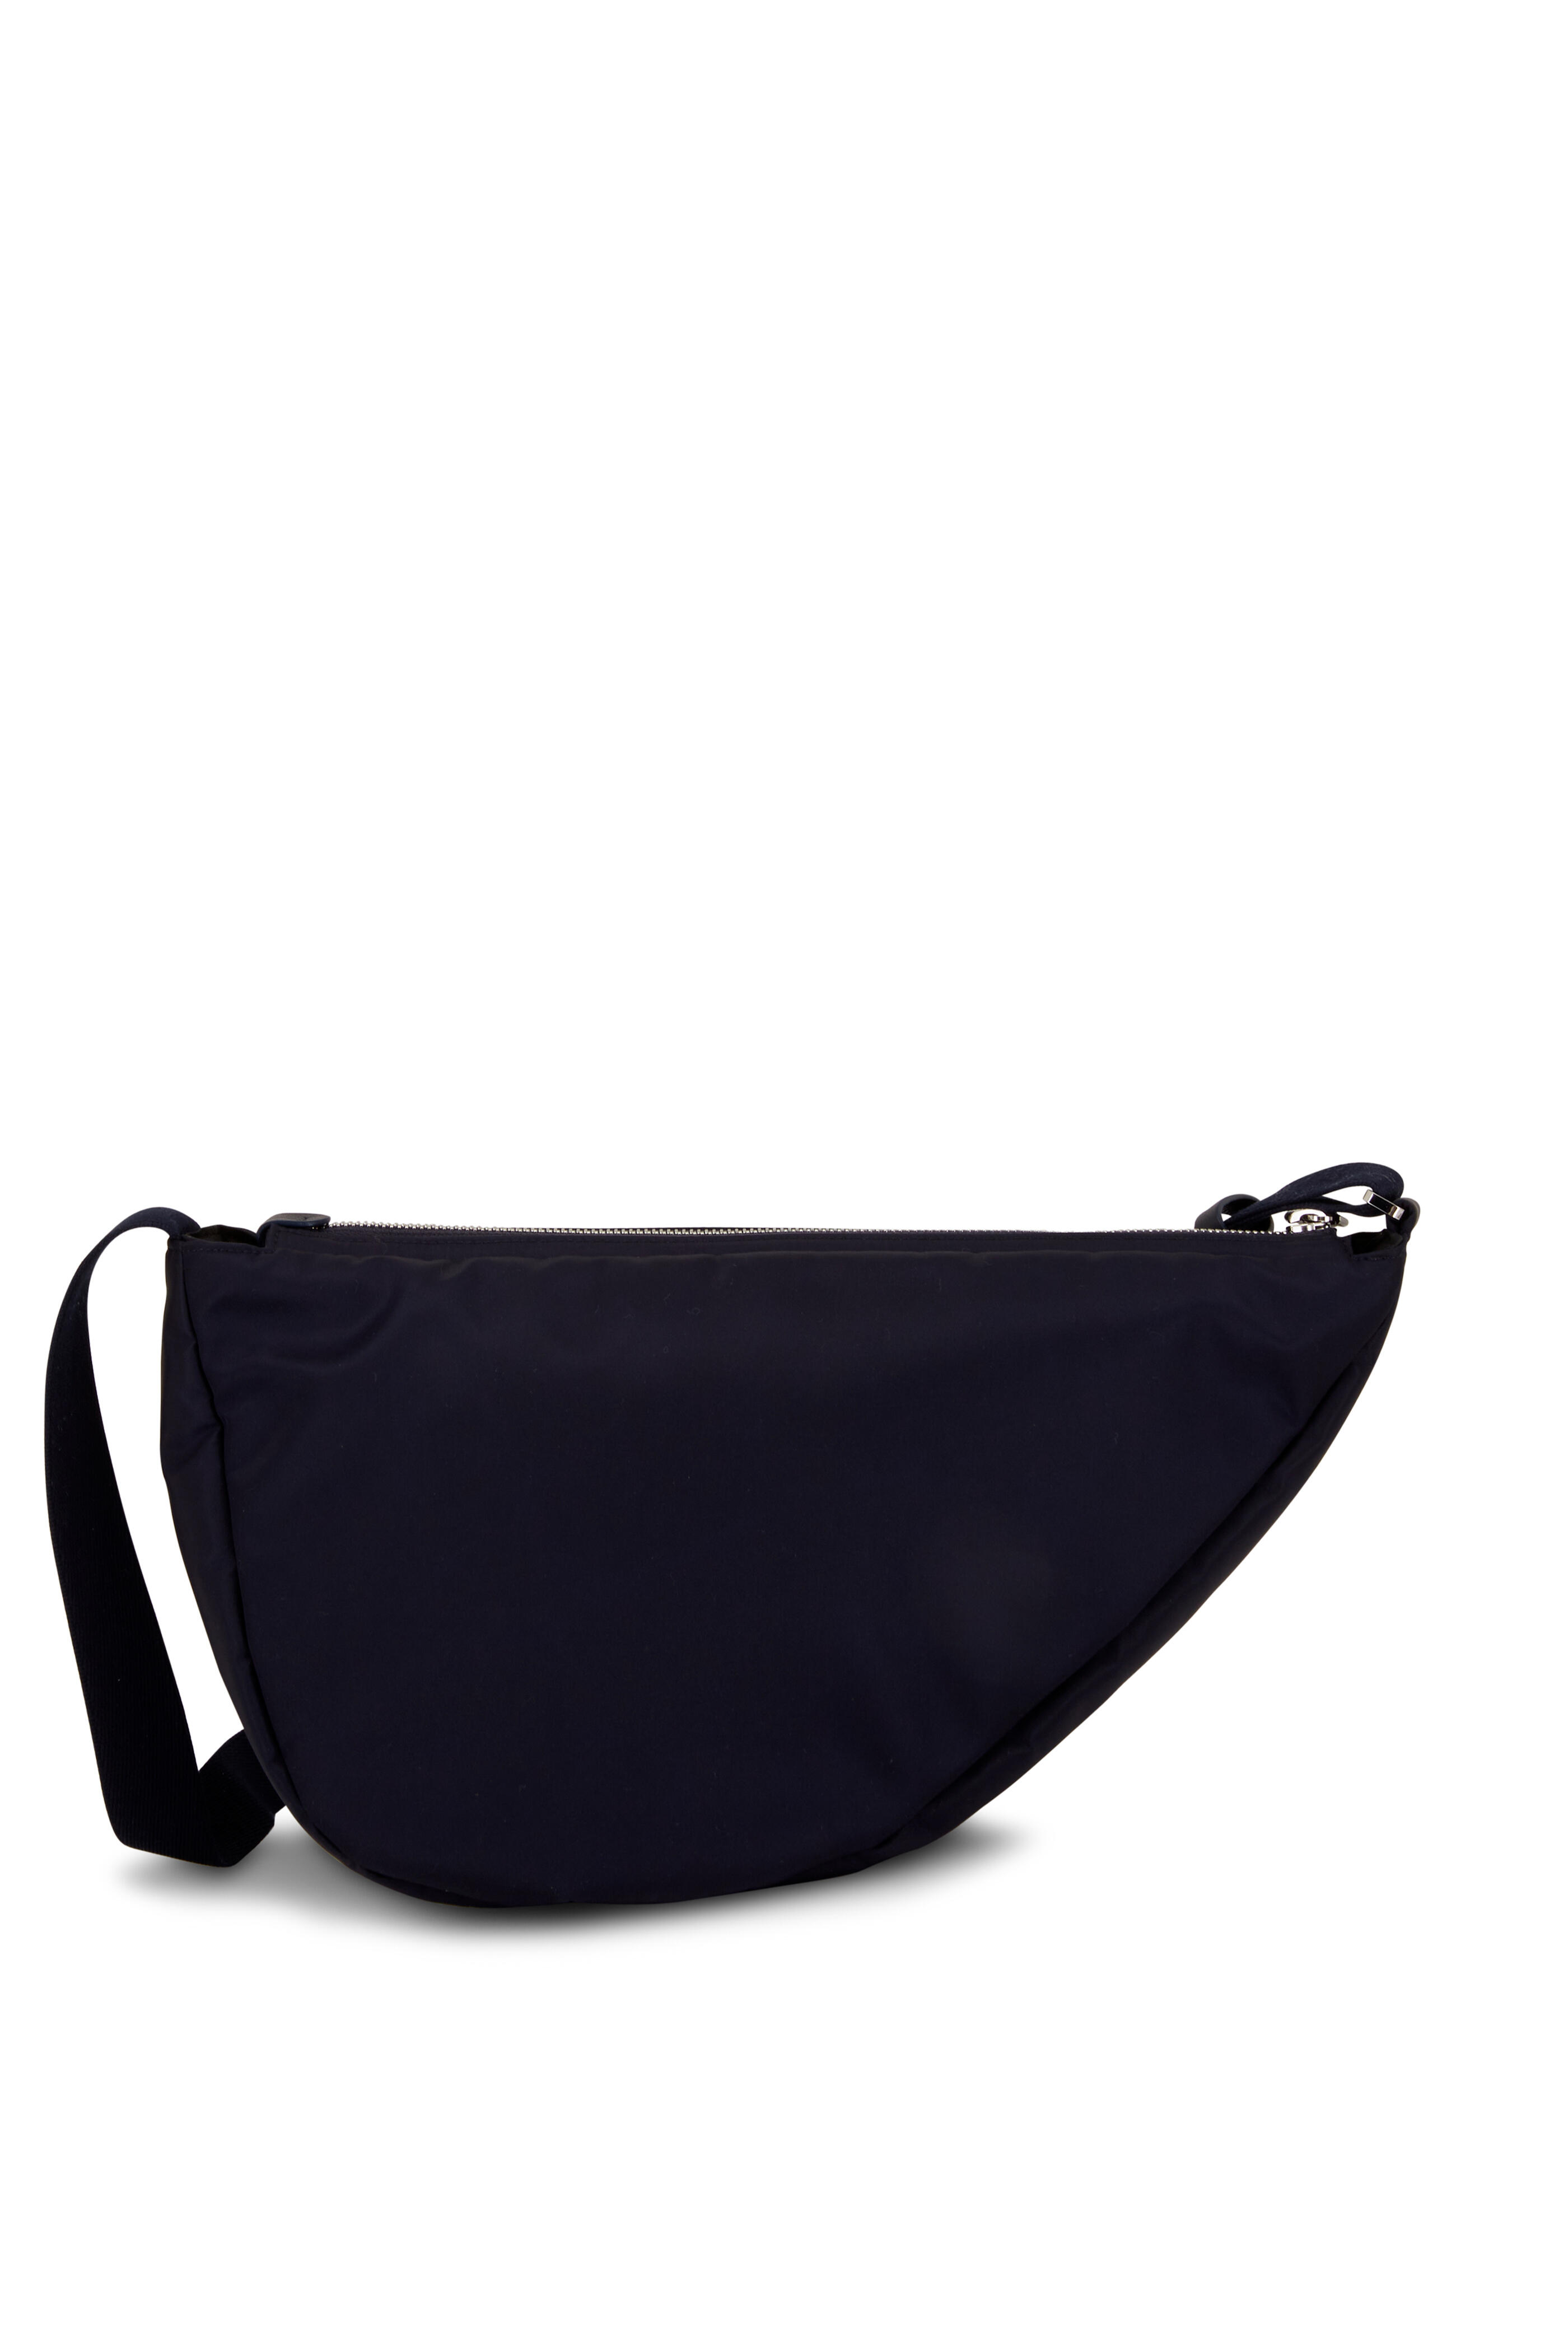 The Row, Slouchy banana large white shoulder bag